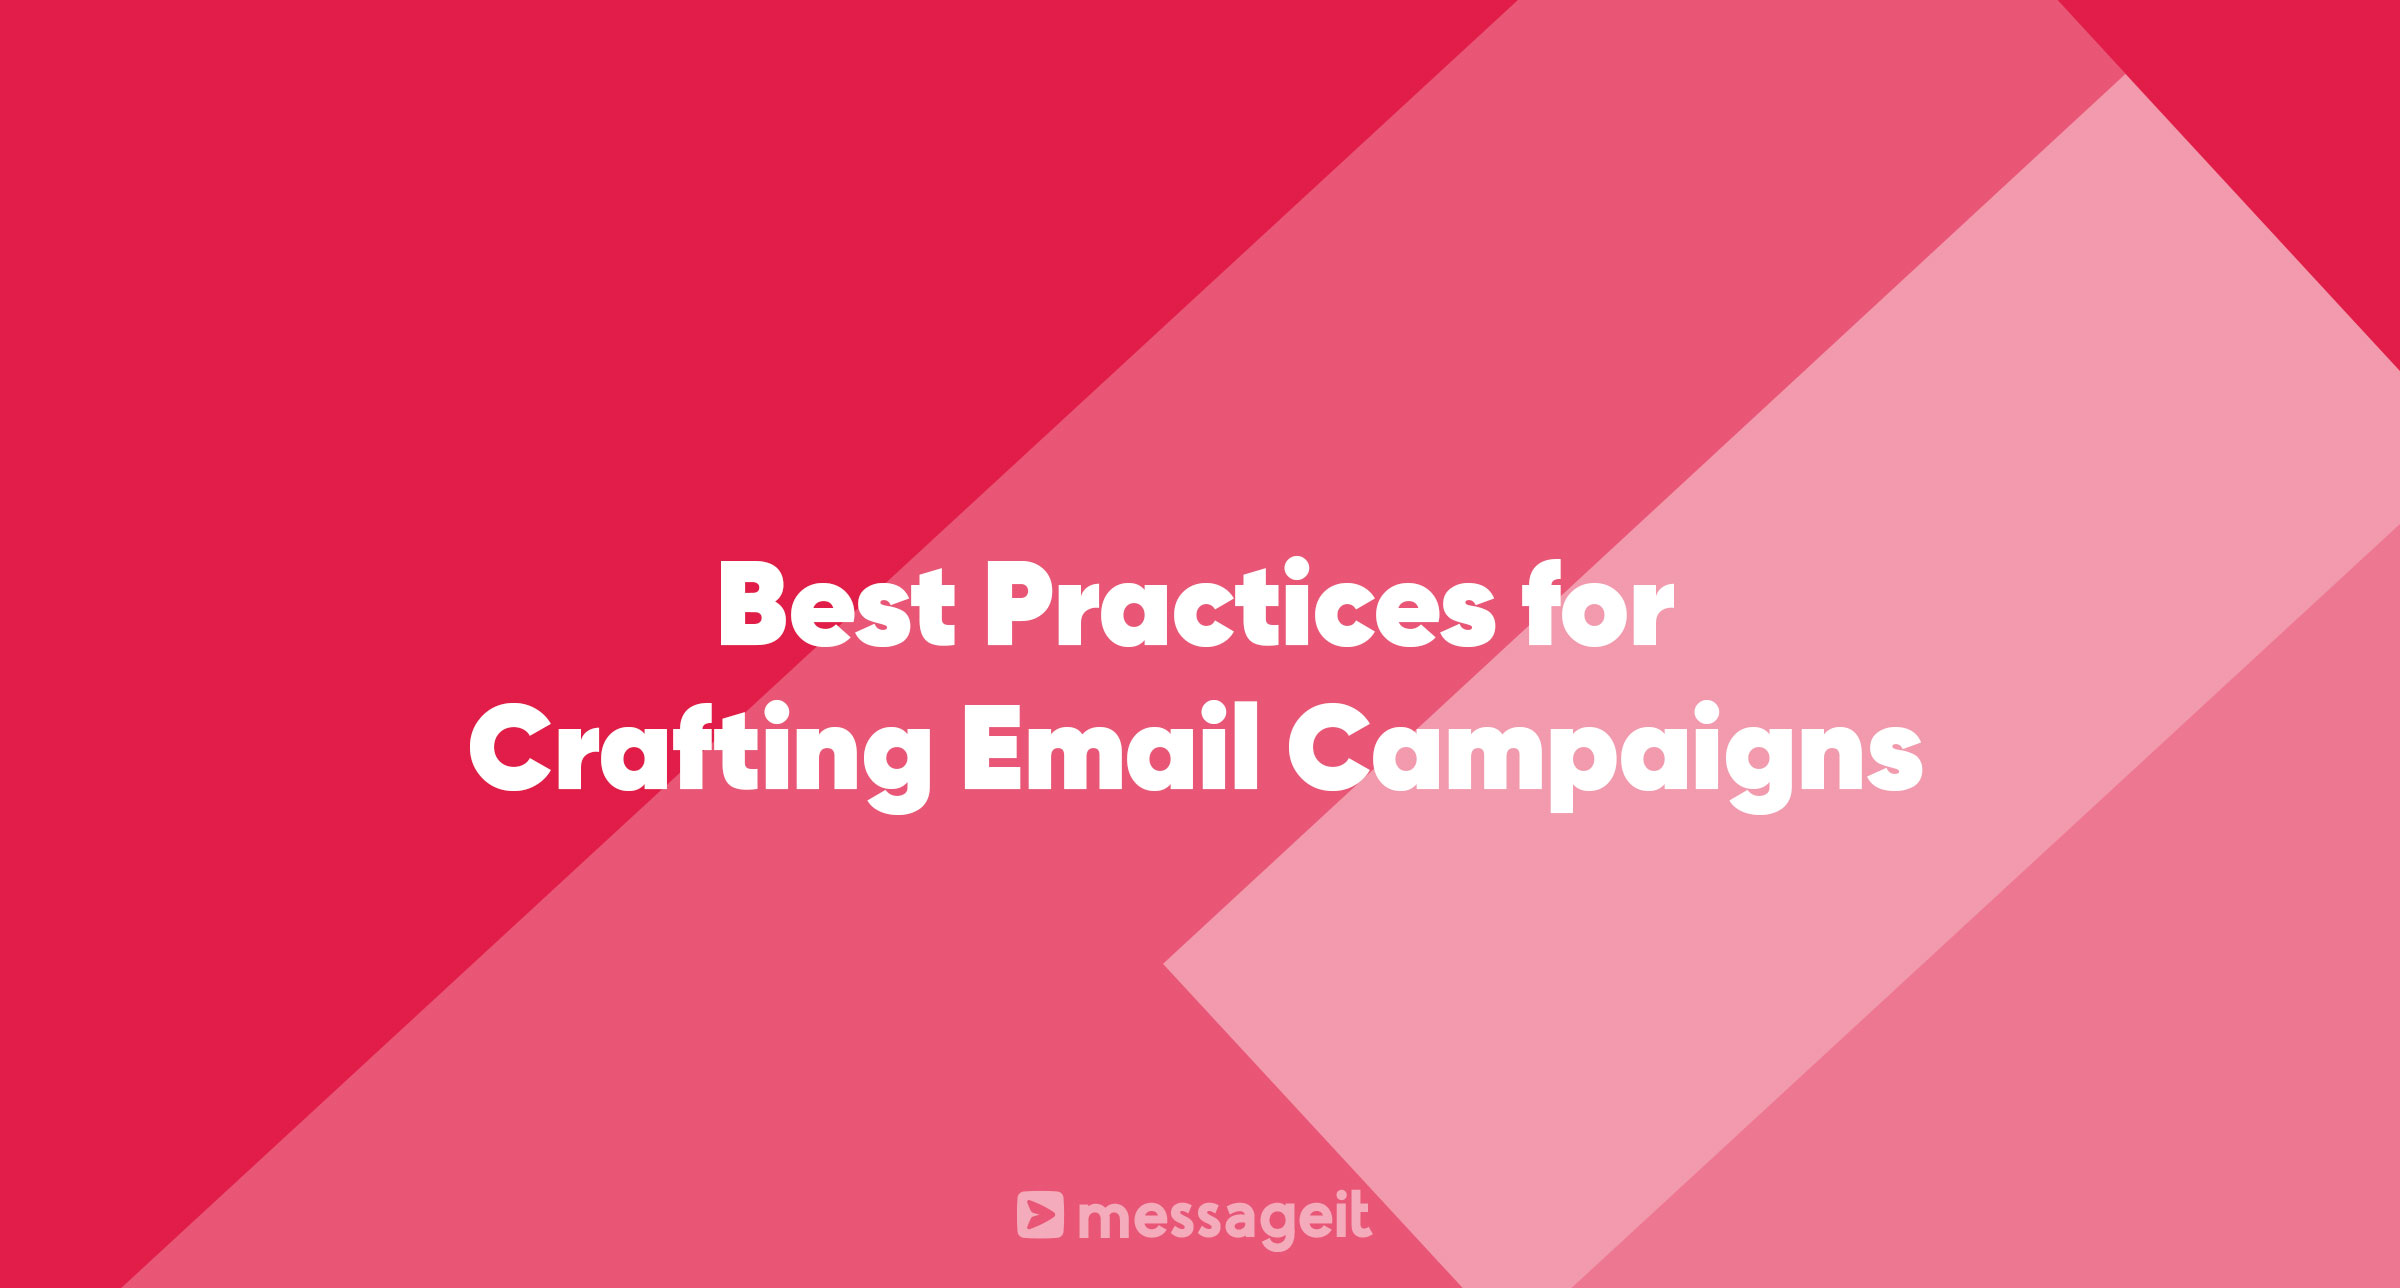 Article | Best Practices for Crafting Email Campaigns